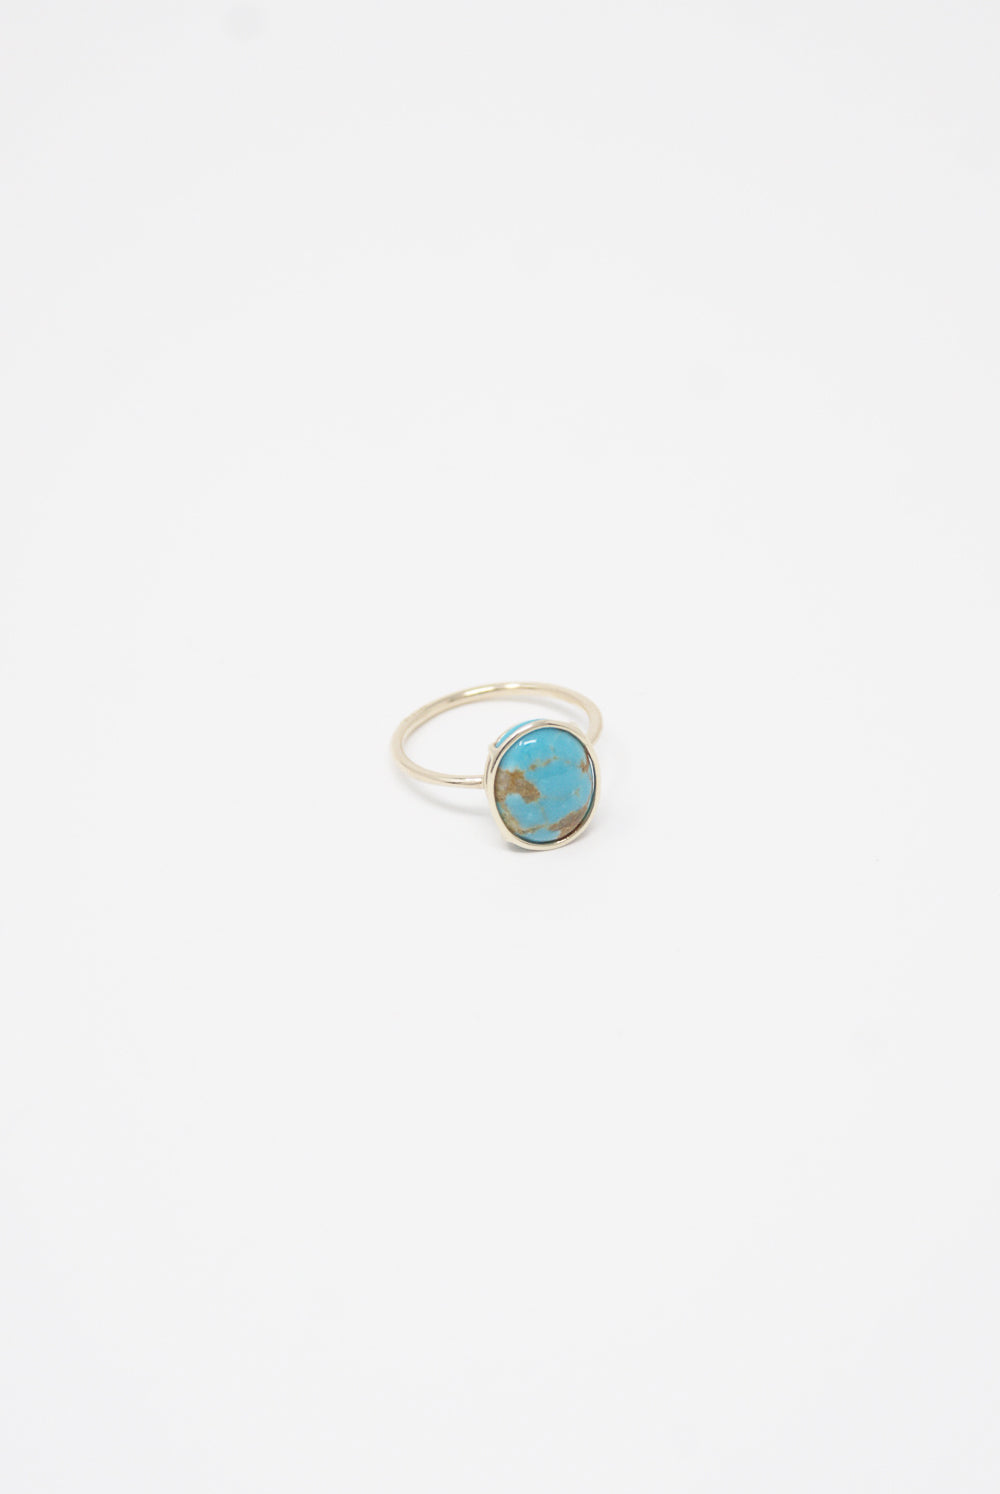 Mary MacGill - 14K Floating Ring in Turquoise size 7.25